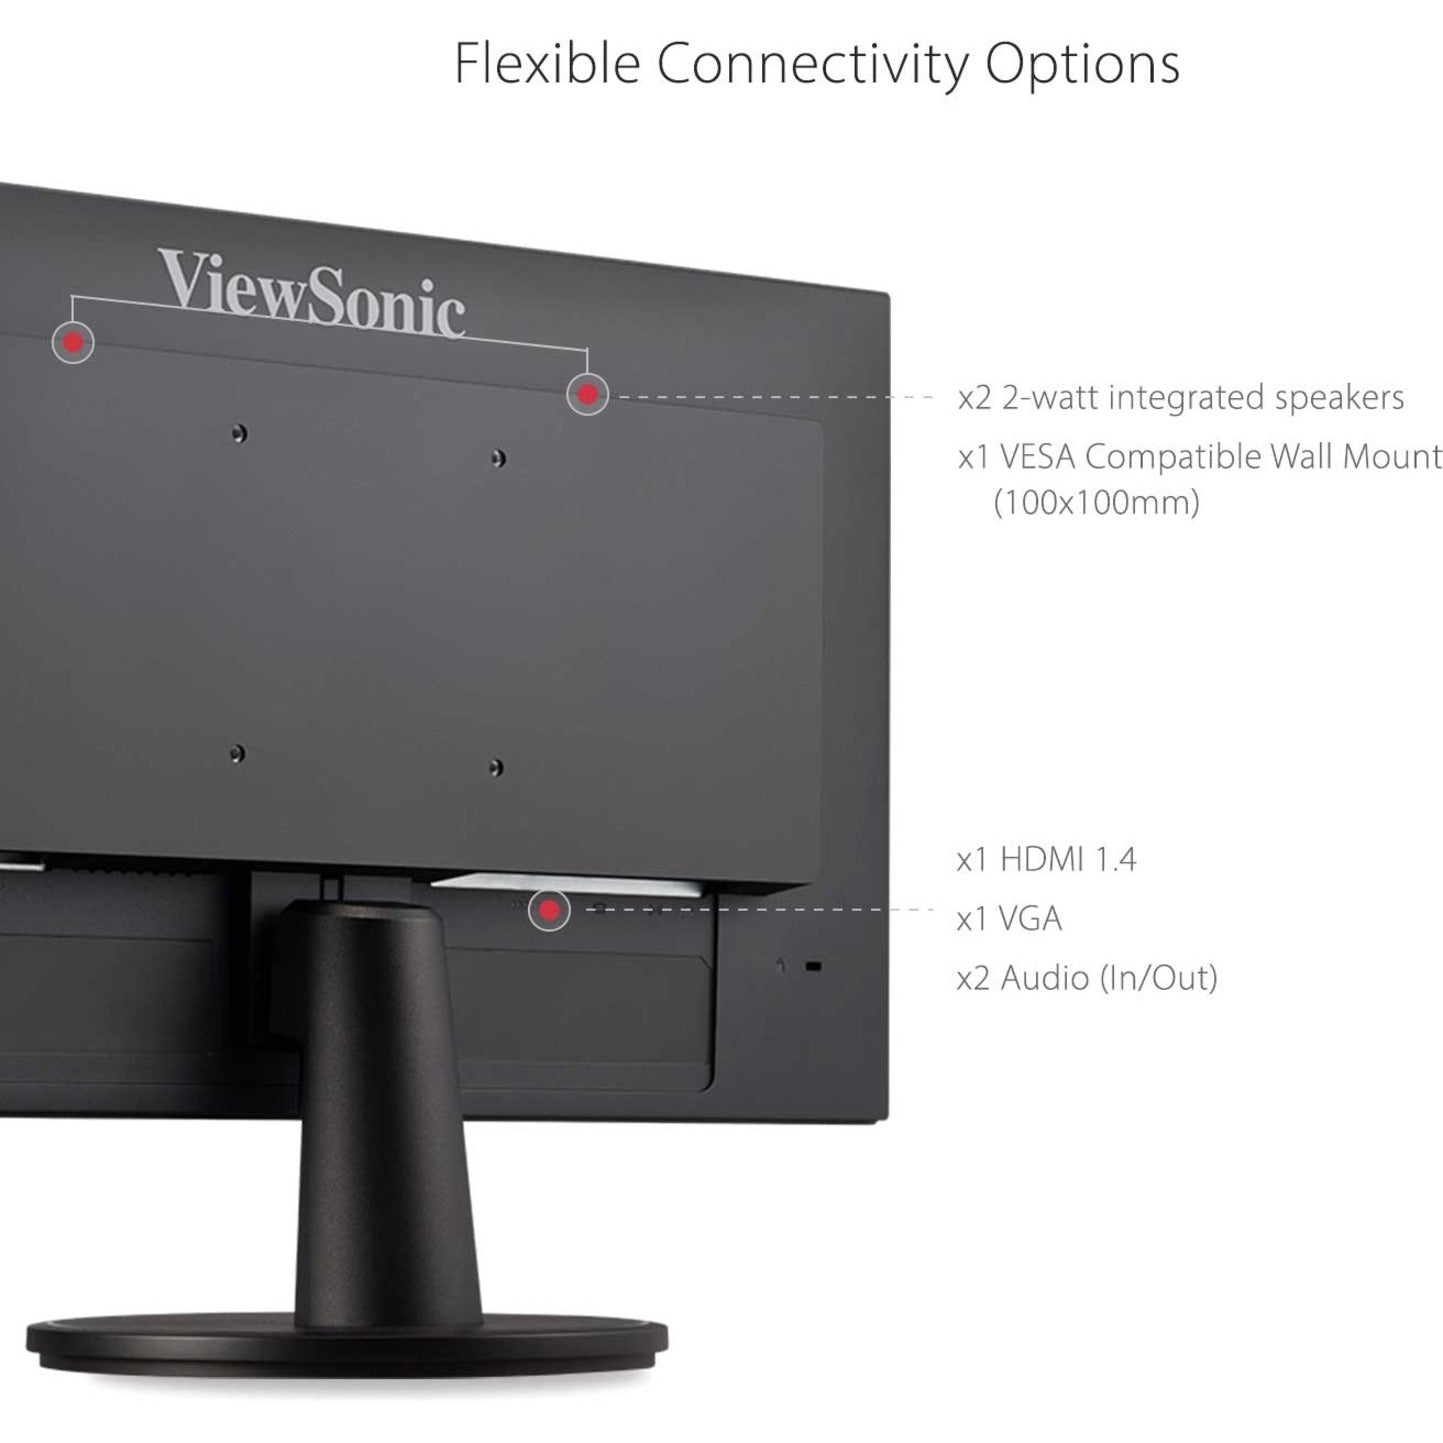 ViewSonic VA2247-MH 22 Inch Full HD 1080p Monitor with Ultra-Thin Bezel AMD FreeSync 75 Hz Eye Care HDMI VGA Inputs for Home and Office